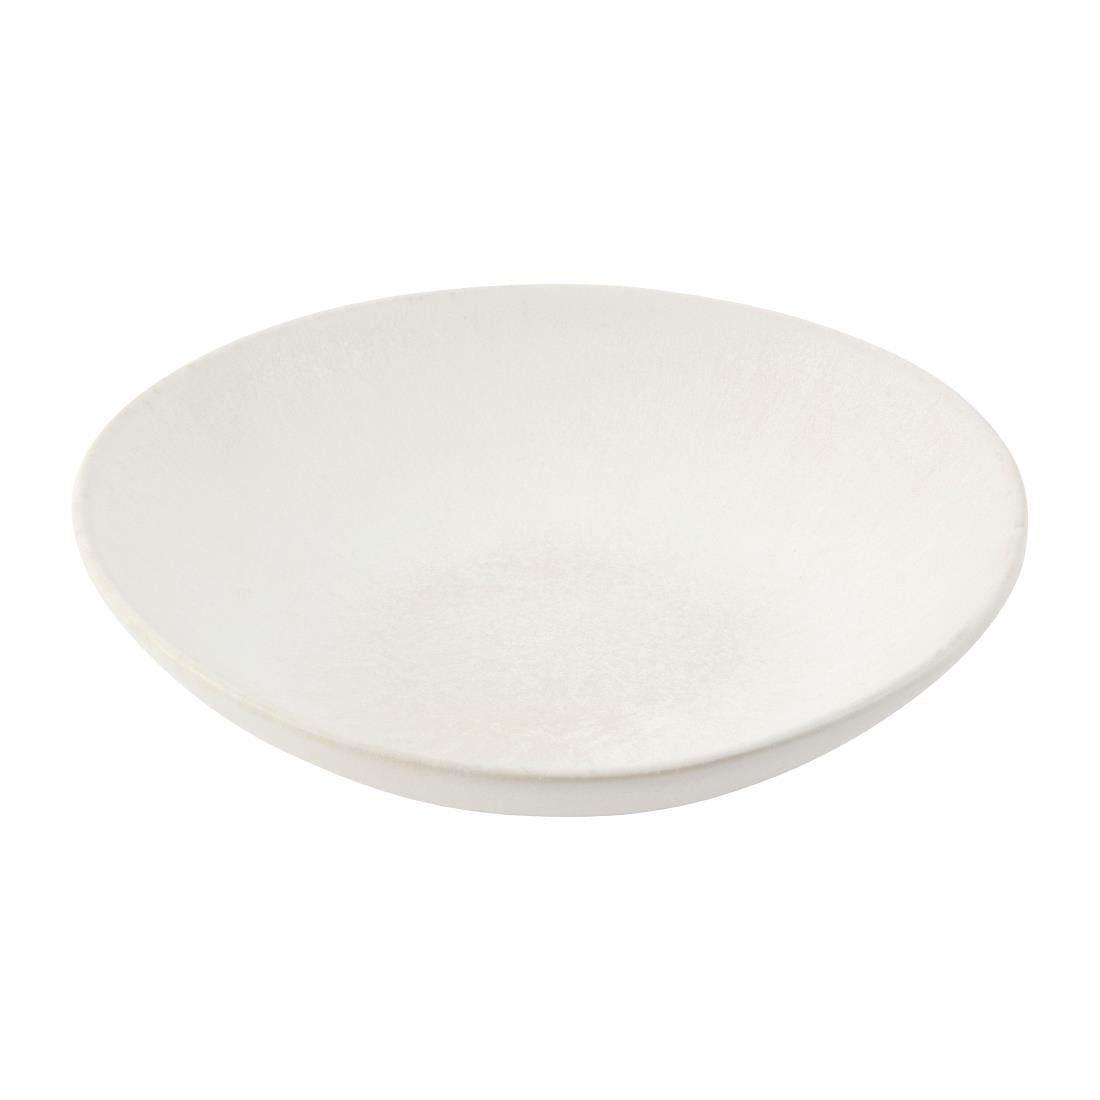 FC704 Olympia Build-a-Bowl White Flat Bowls 190mm (Pack of 6) JD Catering Equipment Solutions Ltd